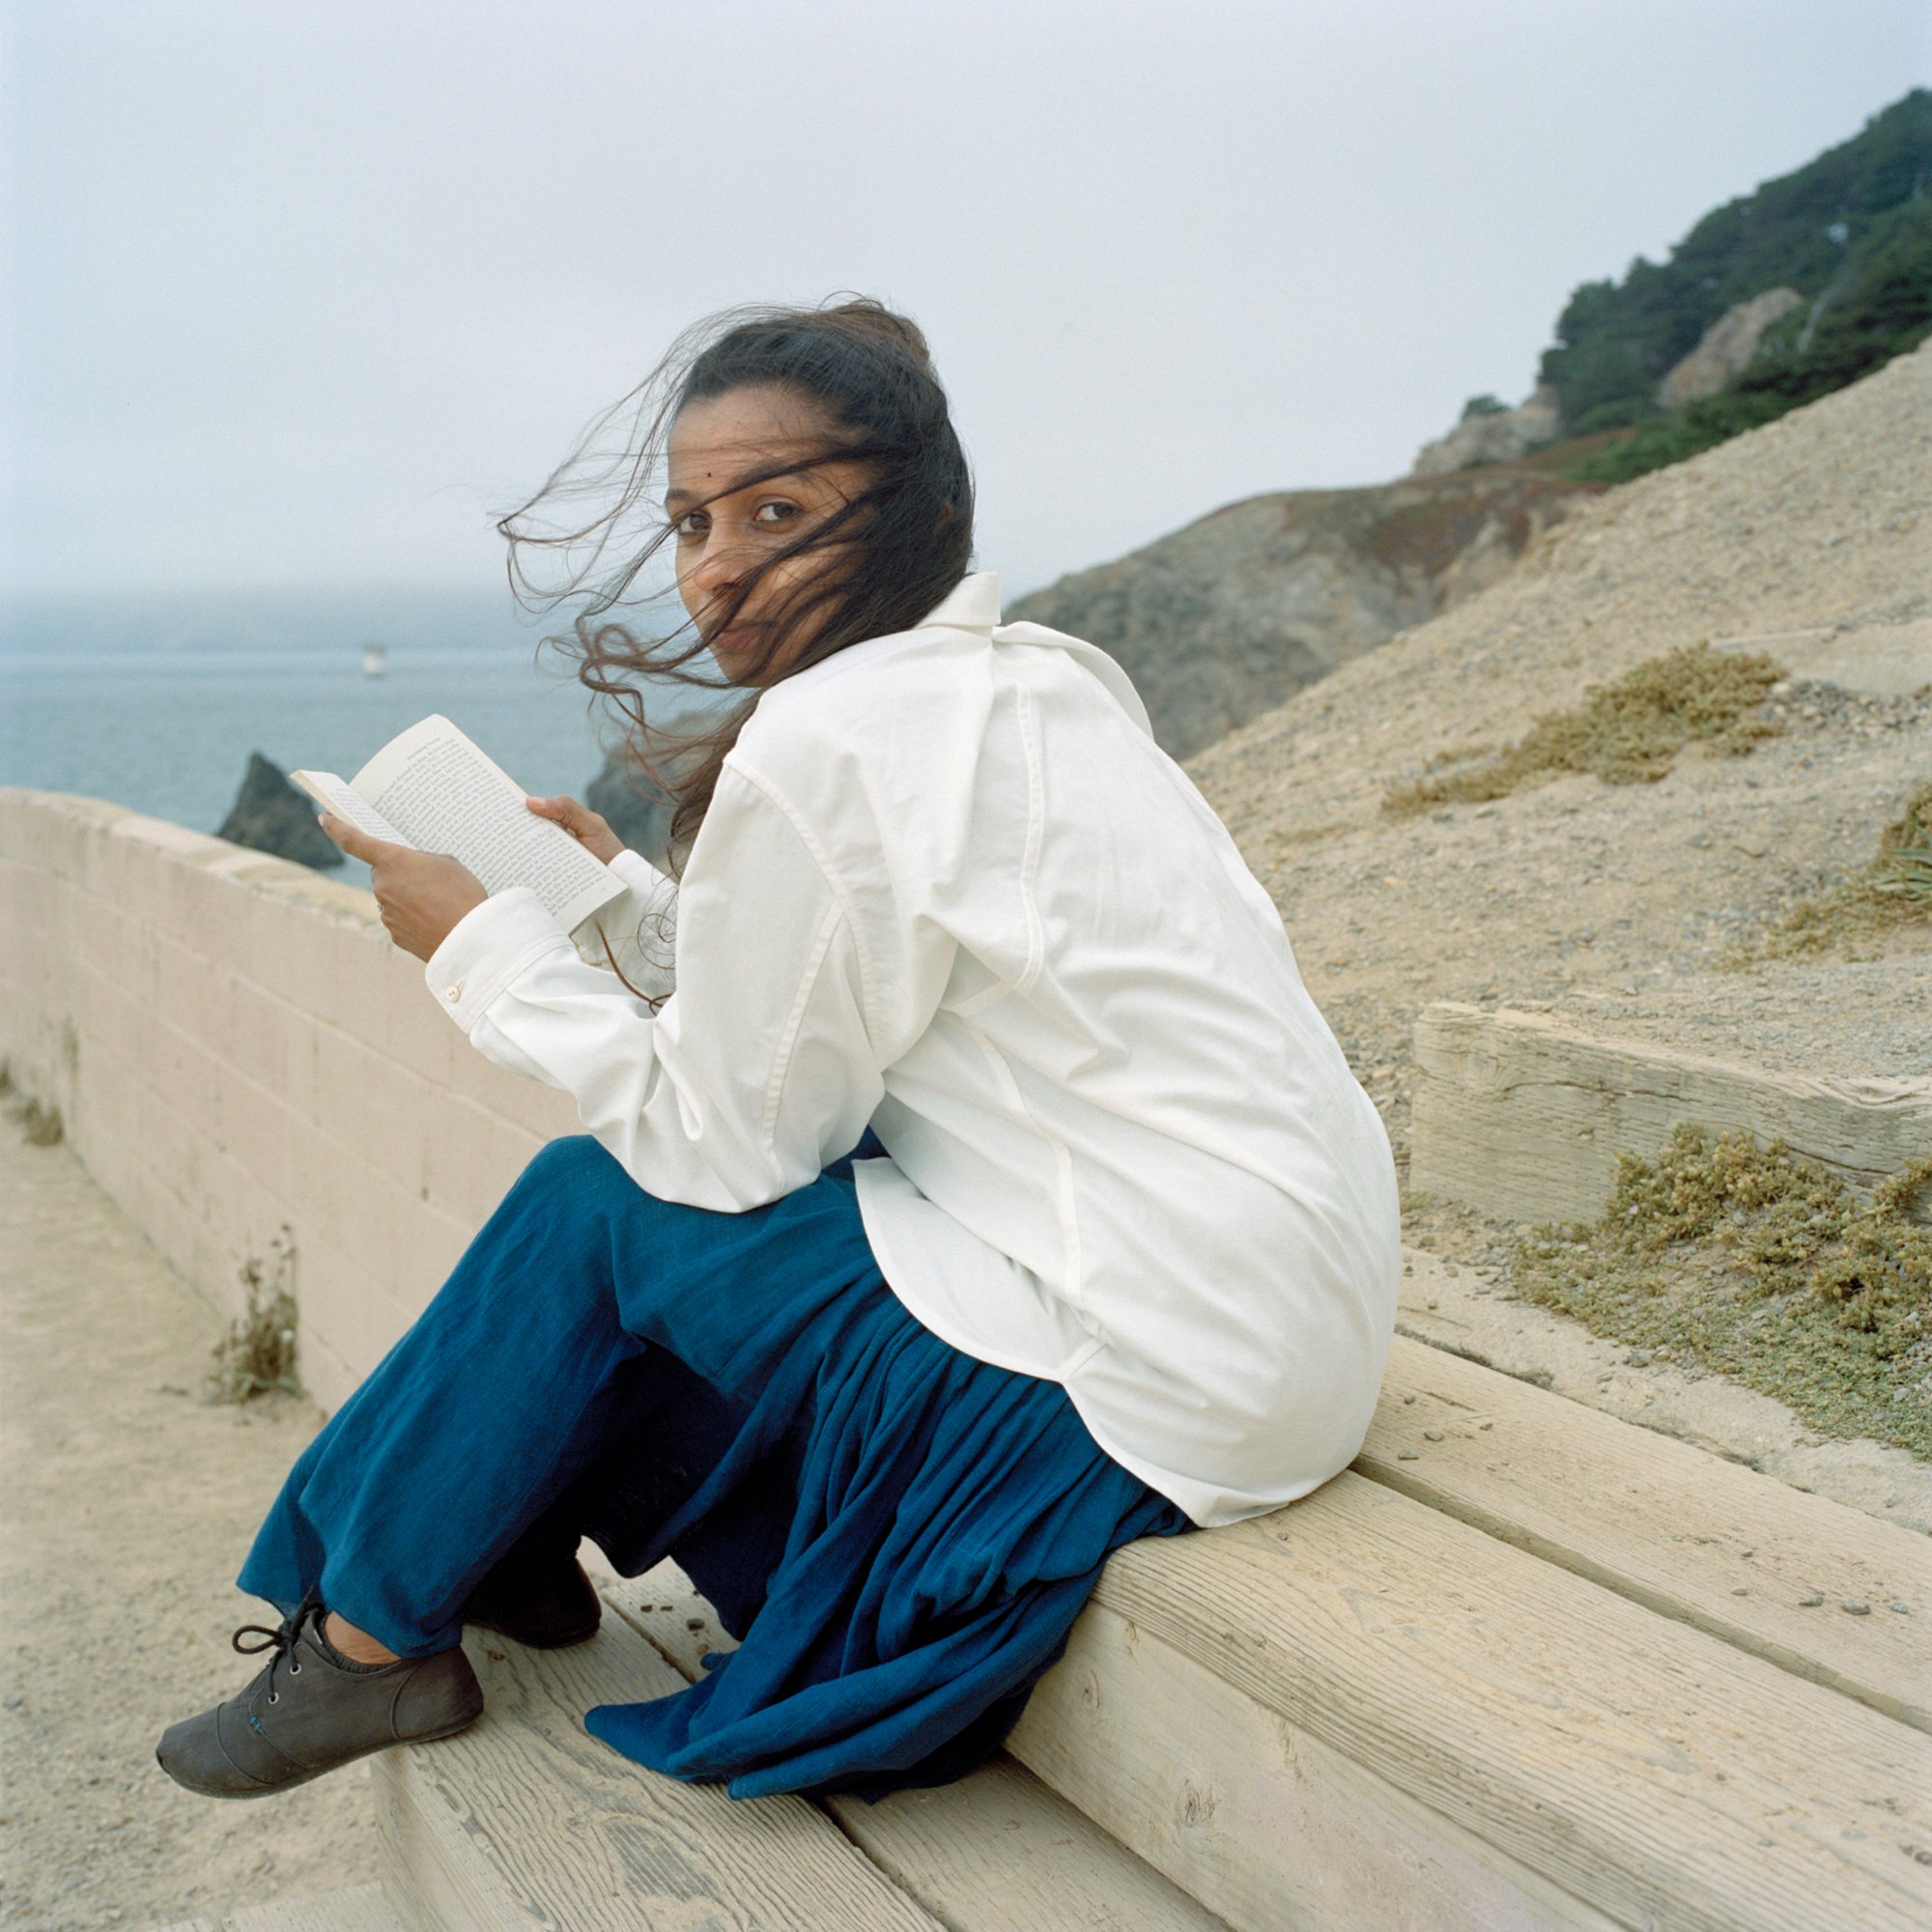 A person holding a book and sitting outside on sandy terrain overlooking an ocean.